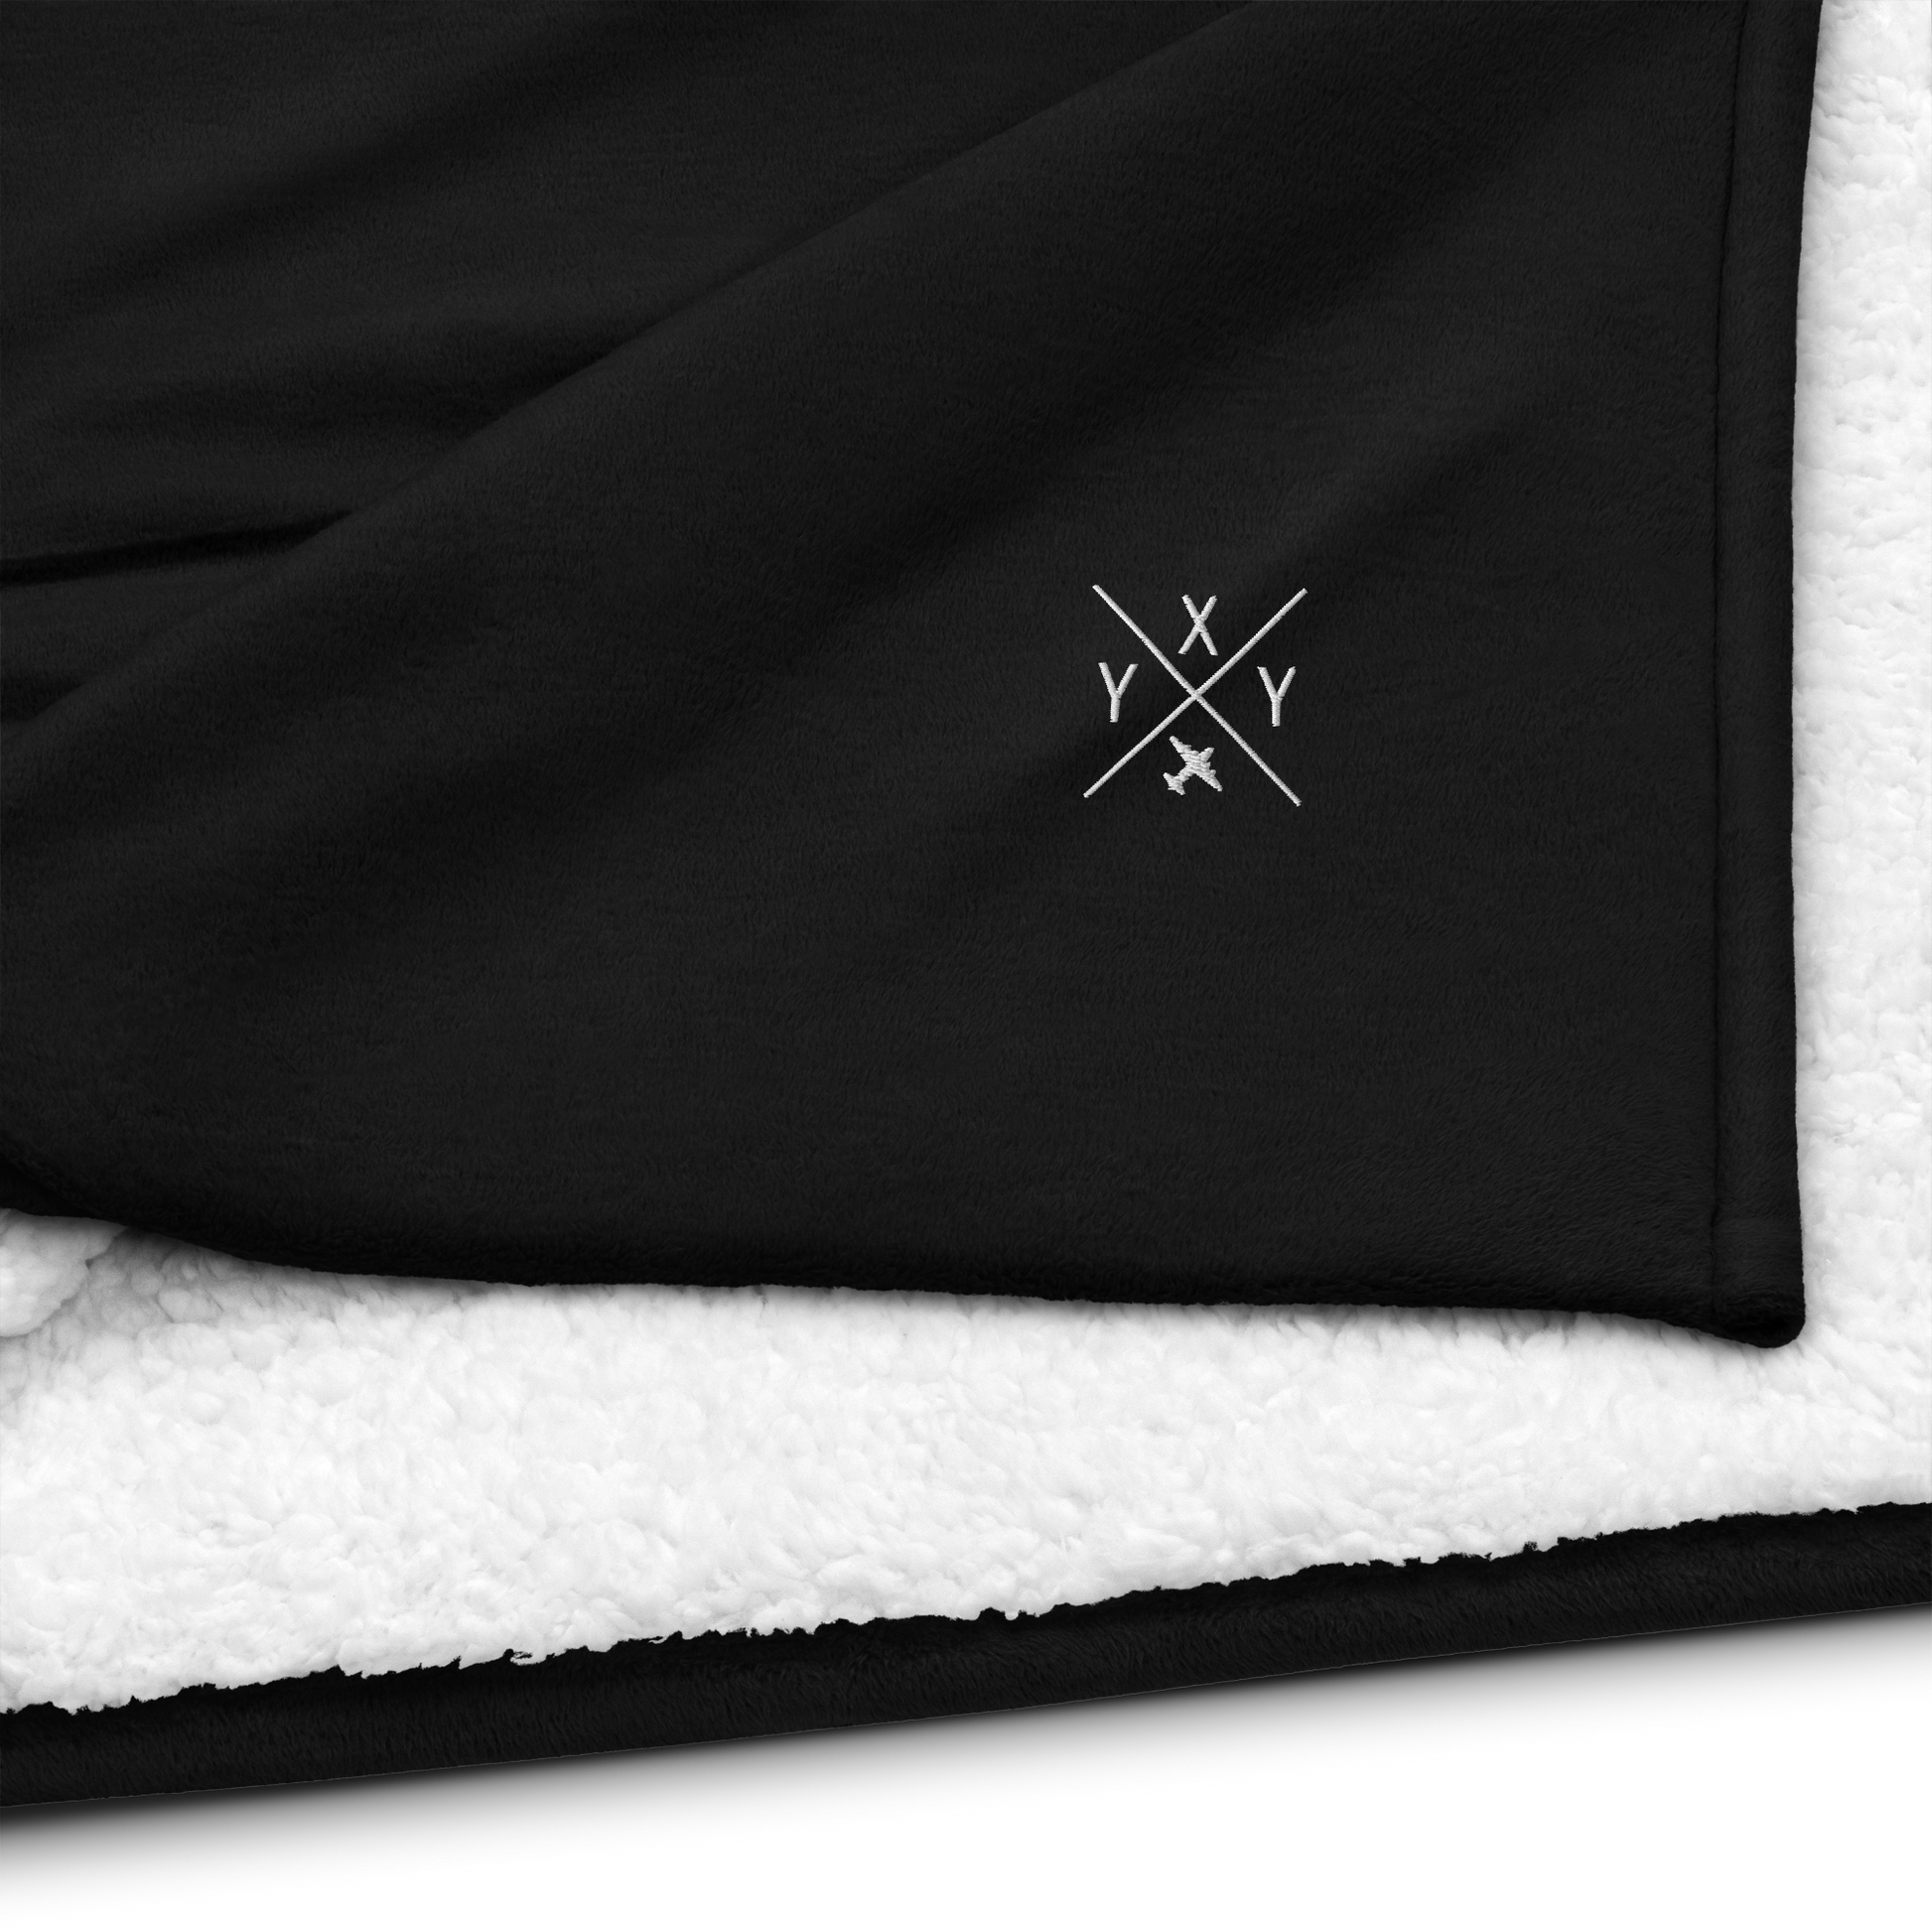 YHM Designs - YXY Whitehorse Premium Sherpa Blanket - Crossed-X Design with Airport Code and Vintage Propliner - White Embroidery - Image 03